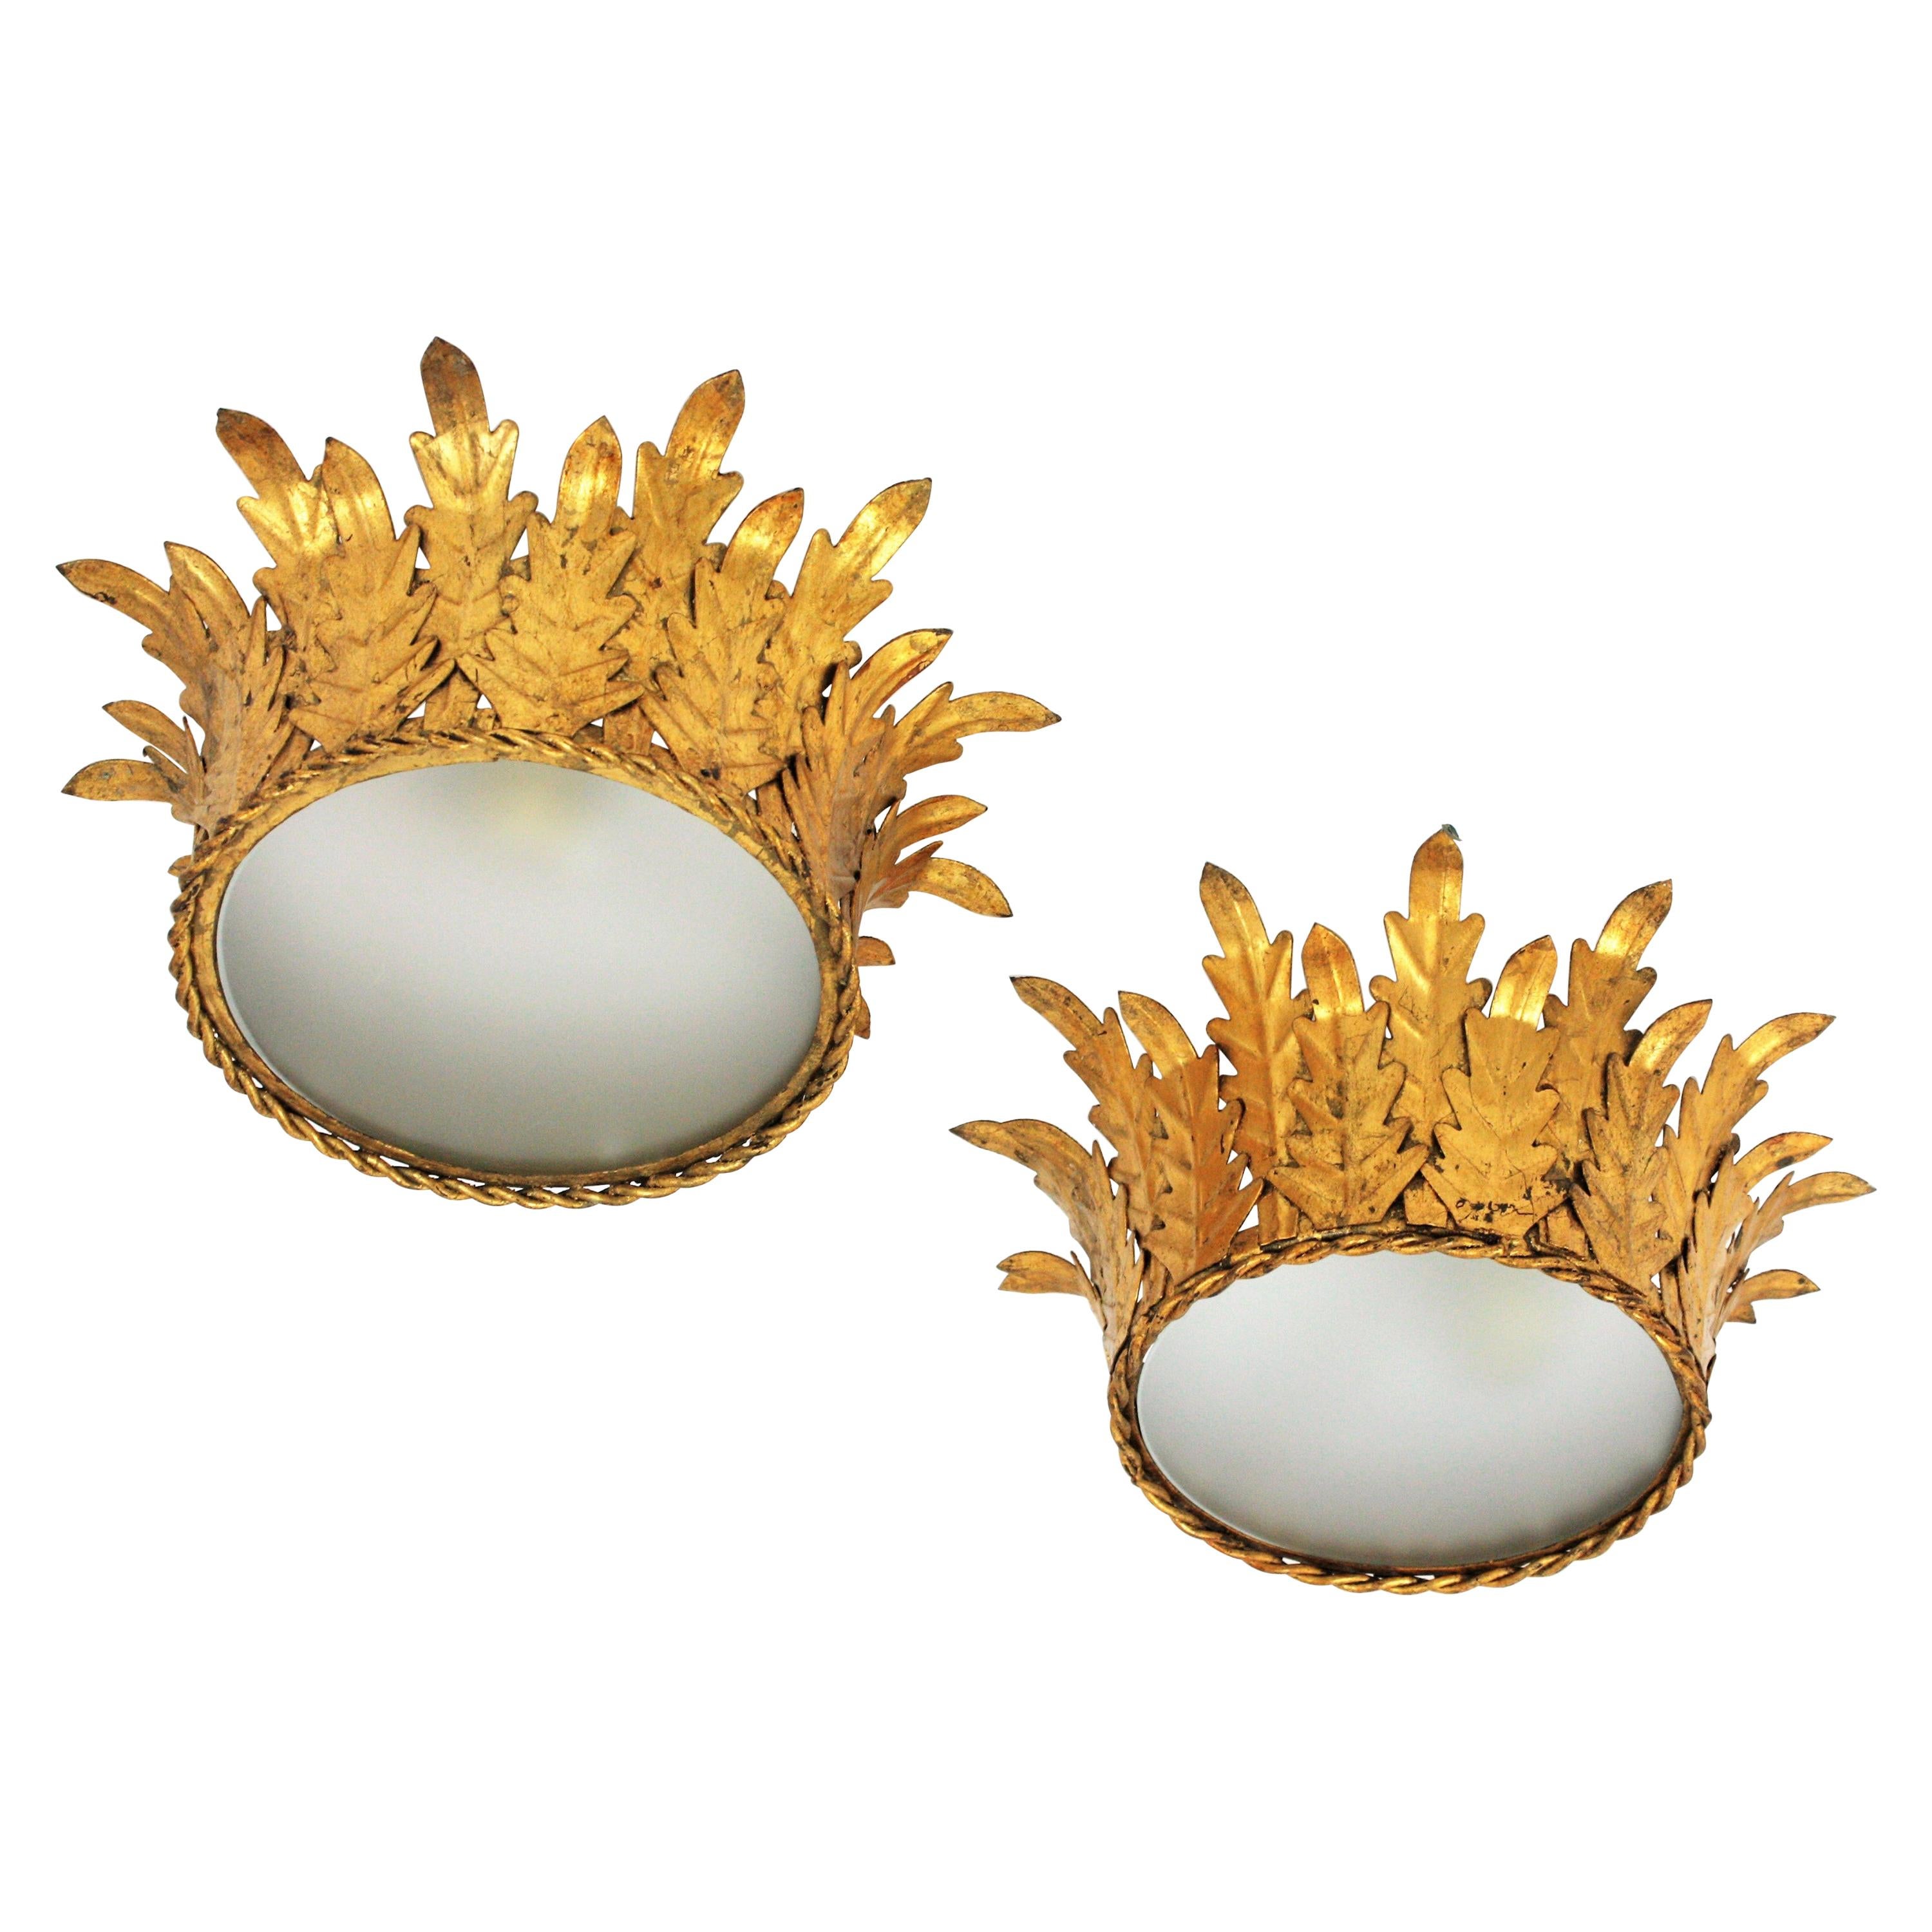 Pair of Crown Foliage Ceiling Light Fixtures in Gilt Iron and Frosted Glass